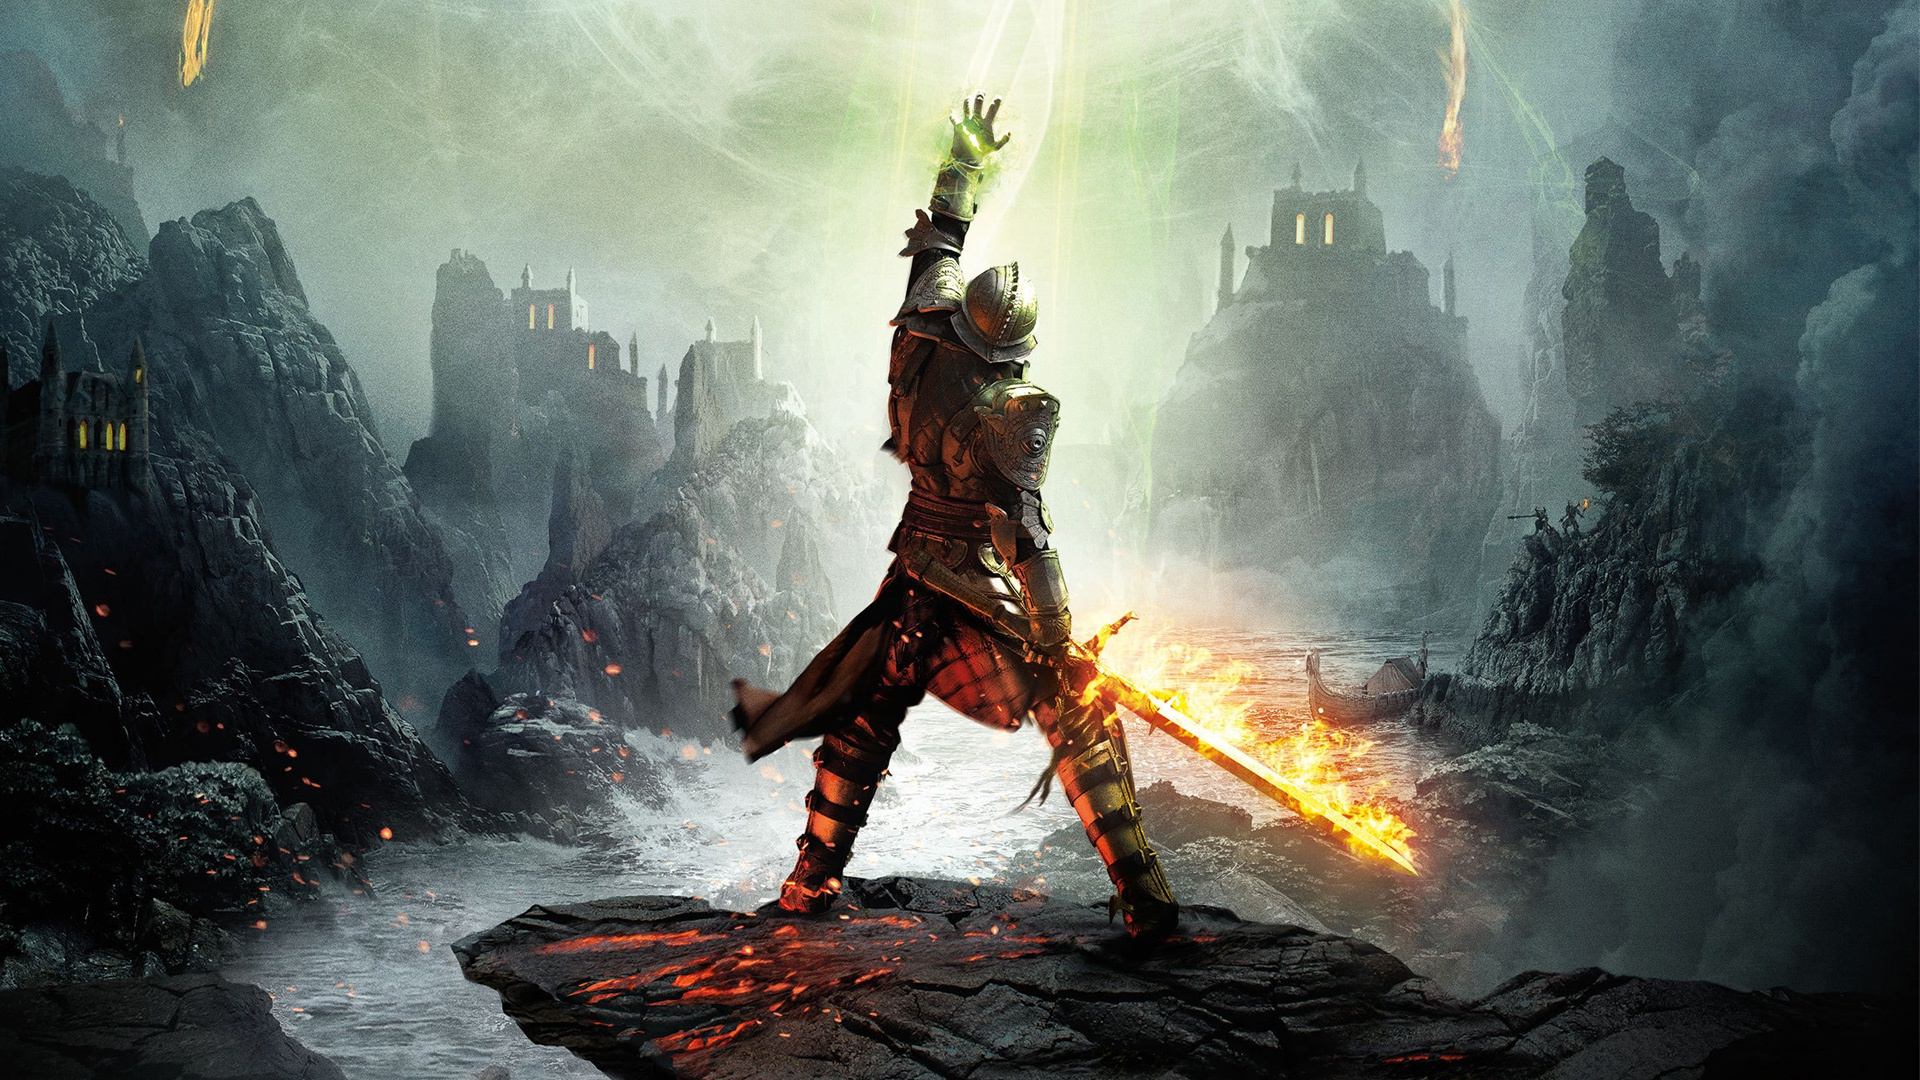 Dragon Age Inquisition Wallpapers IPhone Amazing Wallpaper Video 1920x1080